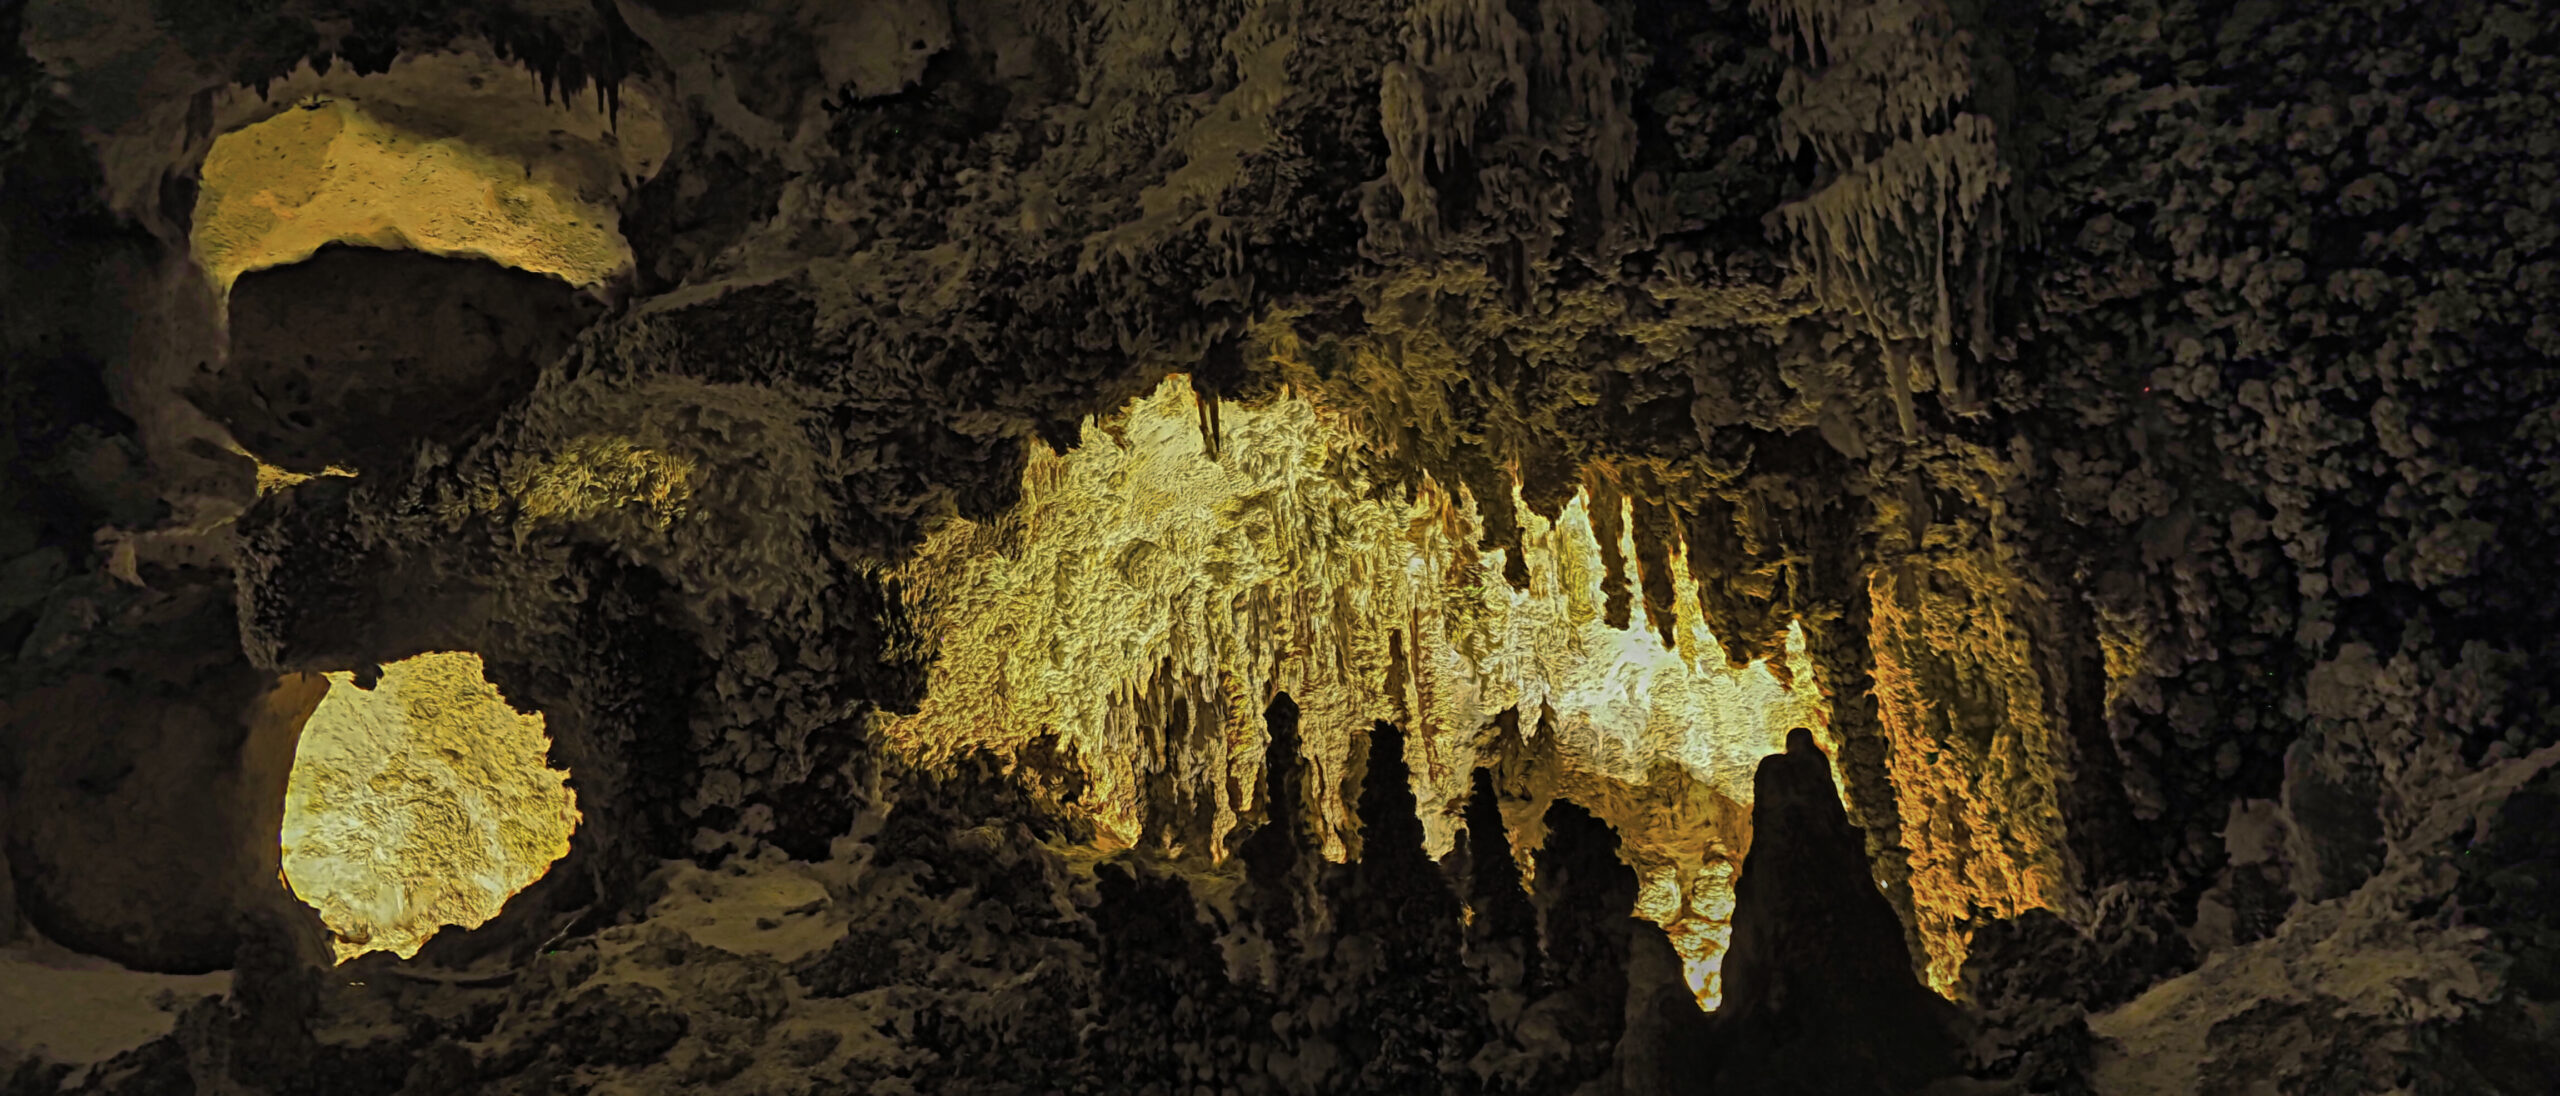 Stalactites in Carlsbad Caverns National Park in New Mexico